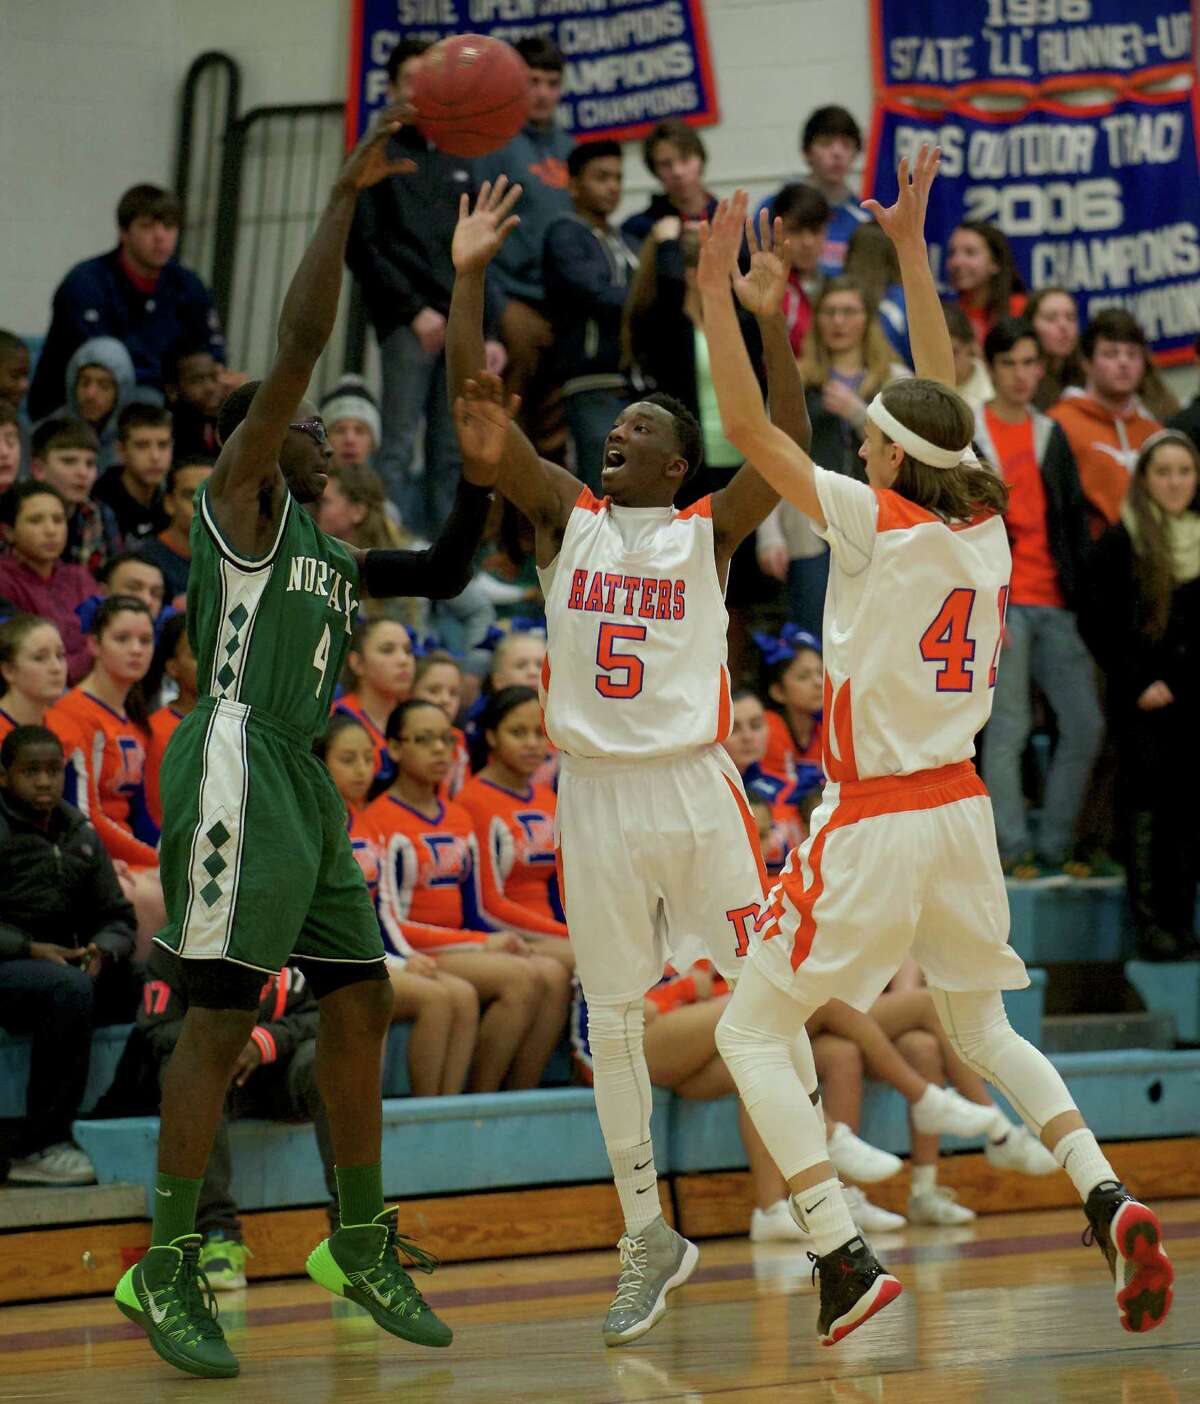 Norwalk's Roy Kane Jr (4) throws a pass over Danbury's C.J. White (5) and Mike Kline (41) during the boys FCIAC basketball game between Norwalk and Danbury high schools played at Danbury High School, Danbury, Conn, on Wednesday, January 8, 2014.